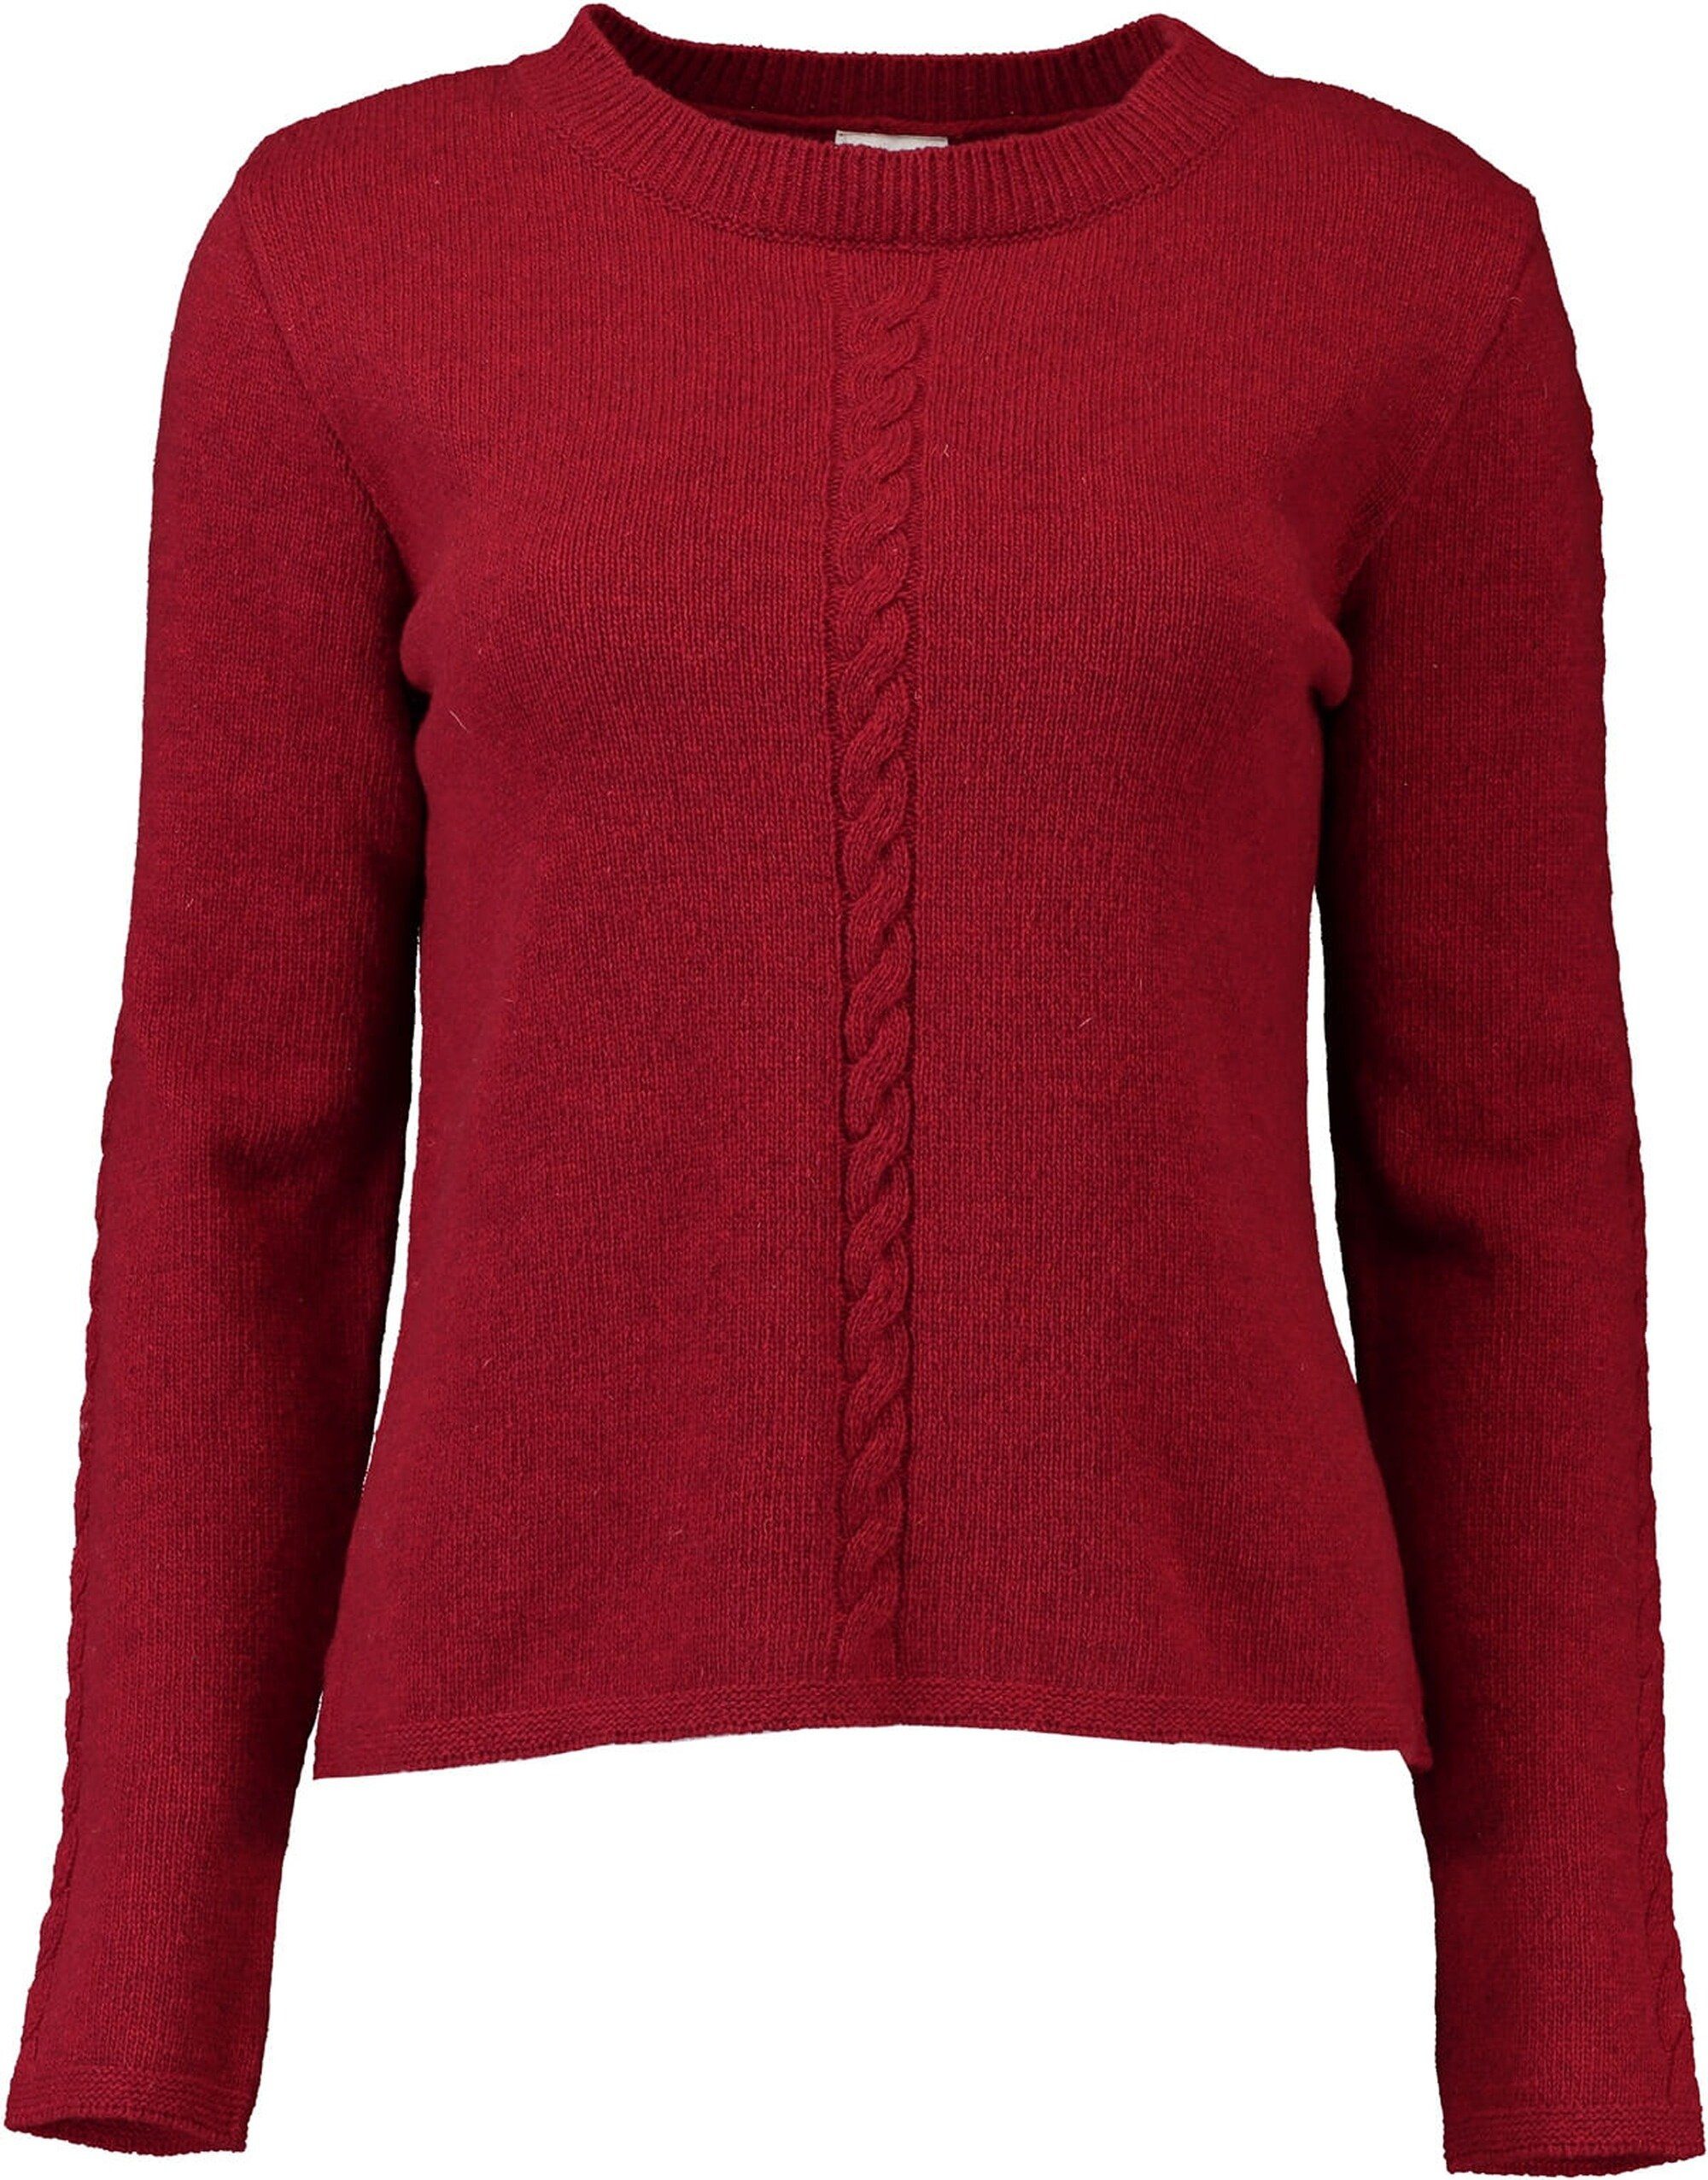 H. Moser Strickpullover h.moser Wollmix-Pullover rot